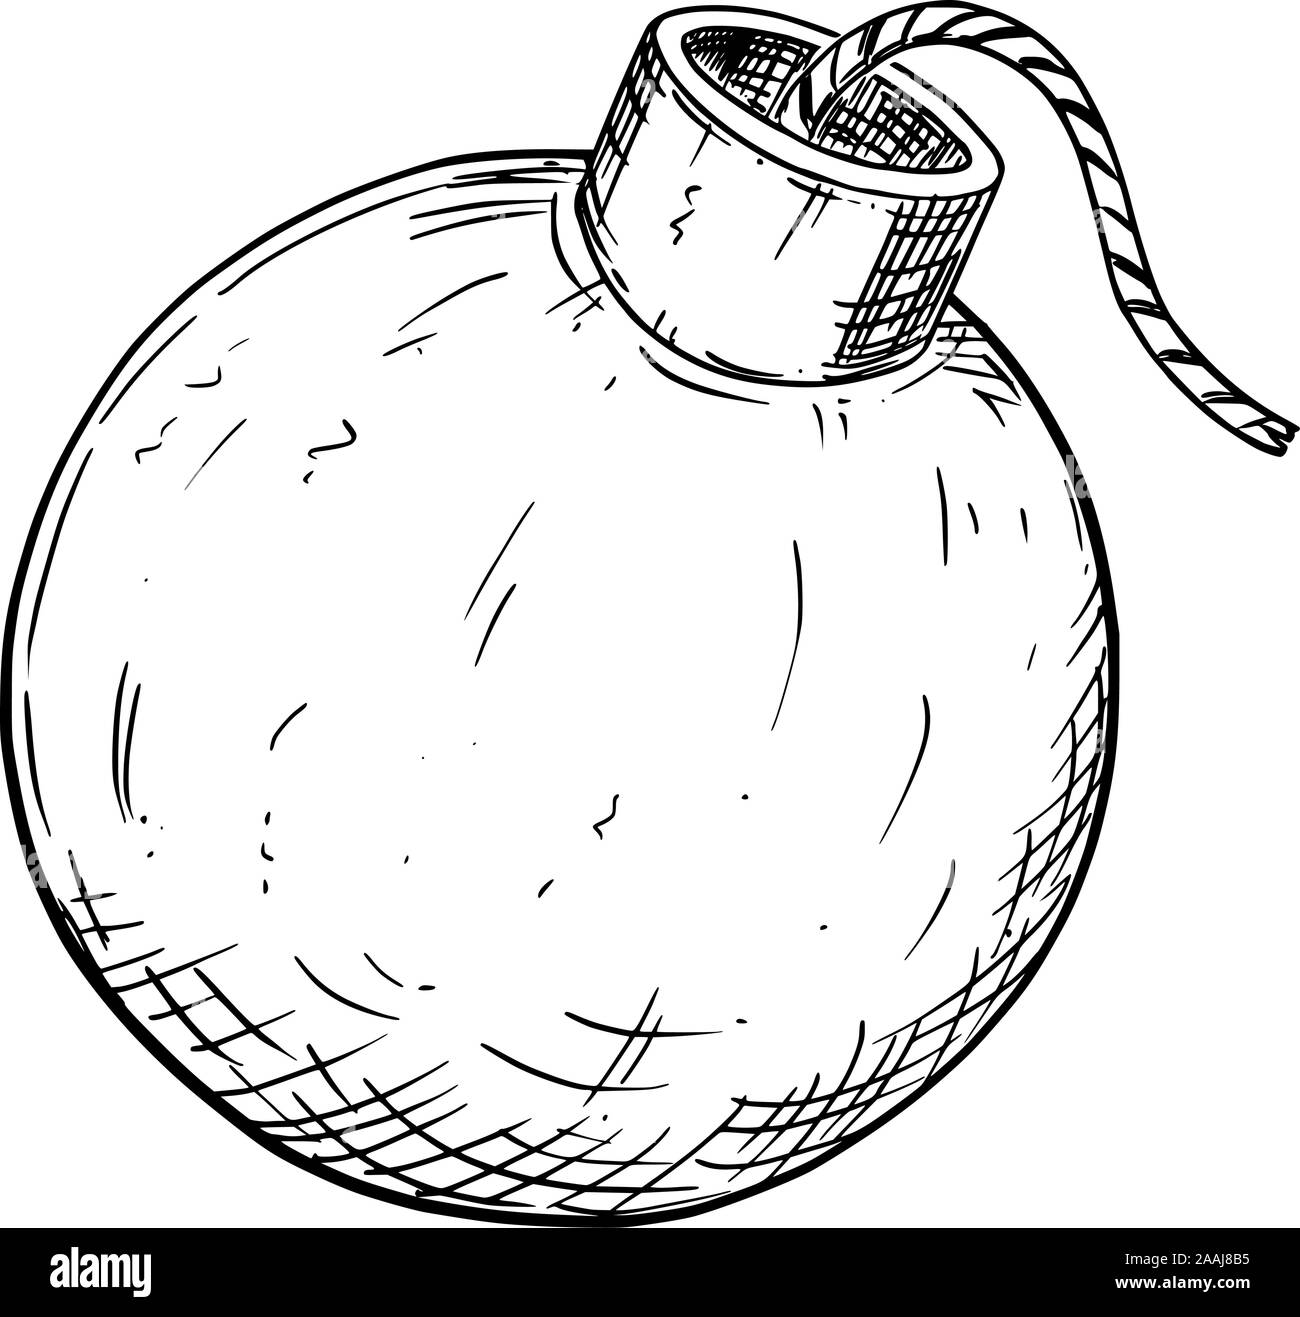 Vector illustration or drawing of bomb with fuse. Stock Vector